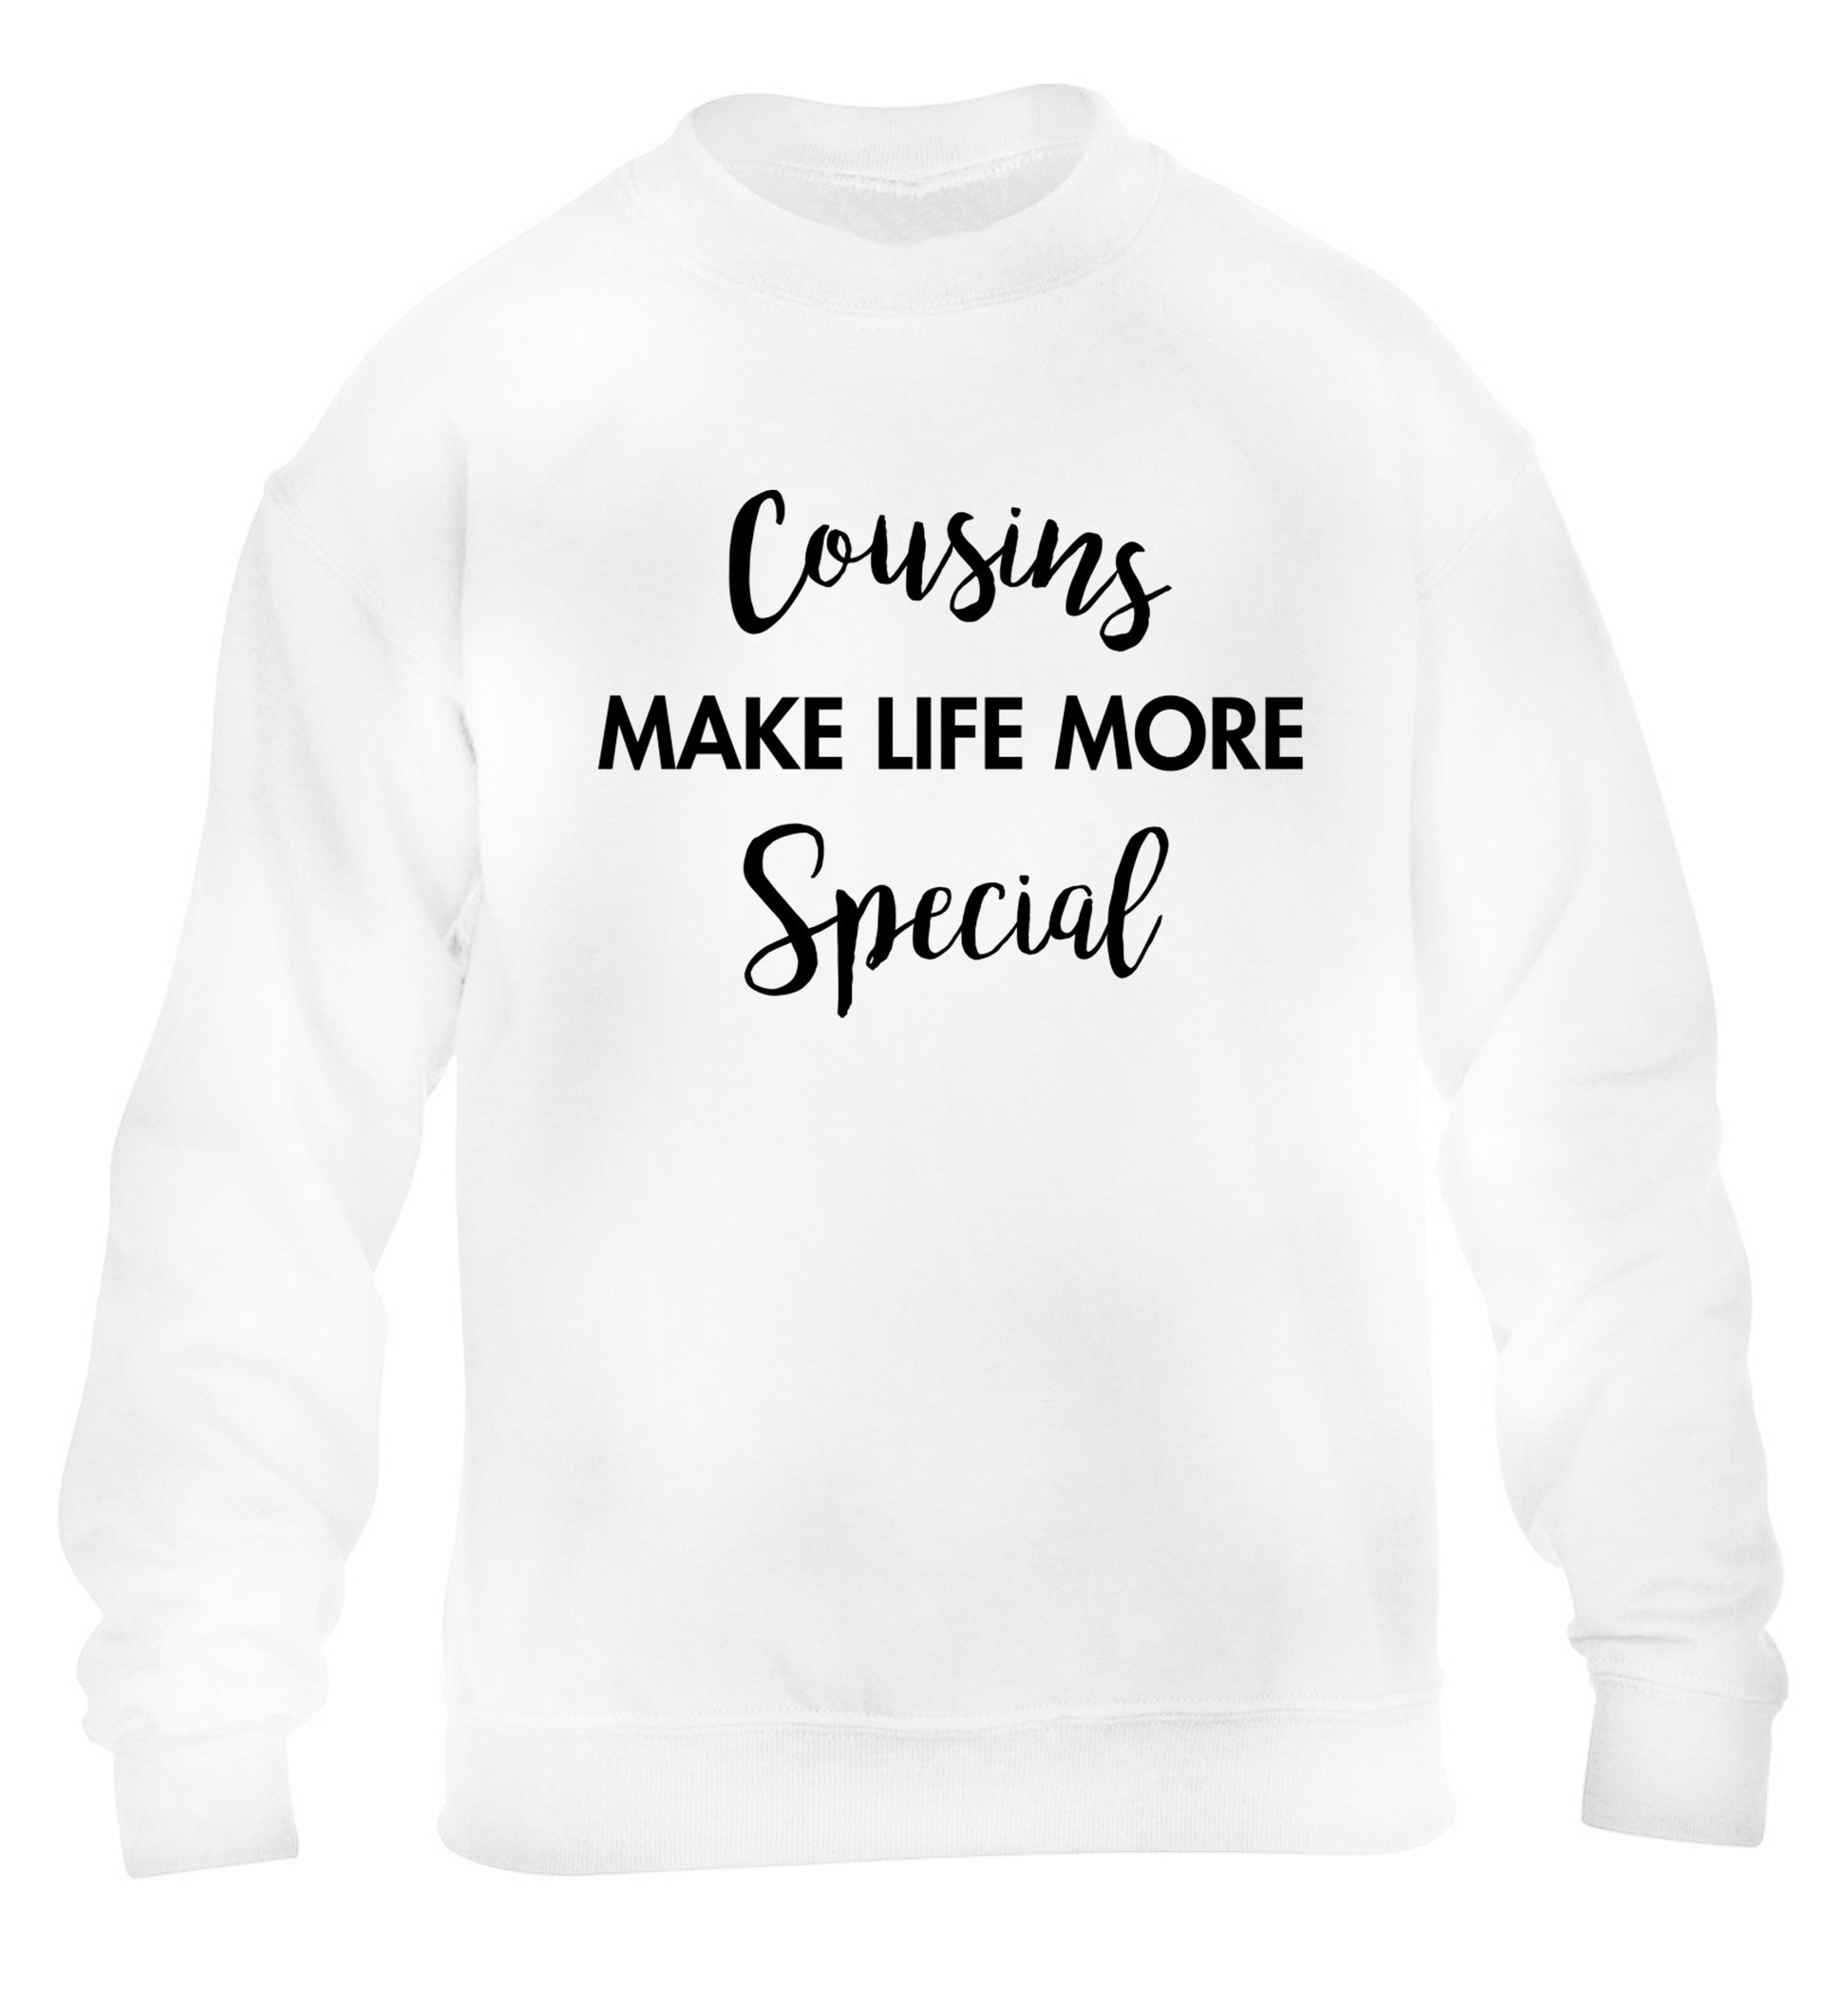 Cousins make life more special children's white sweater 12-14 Years